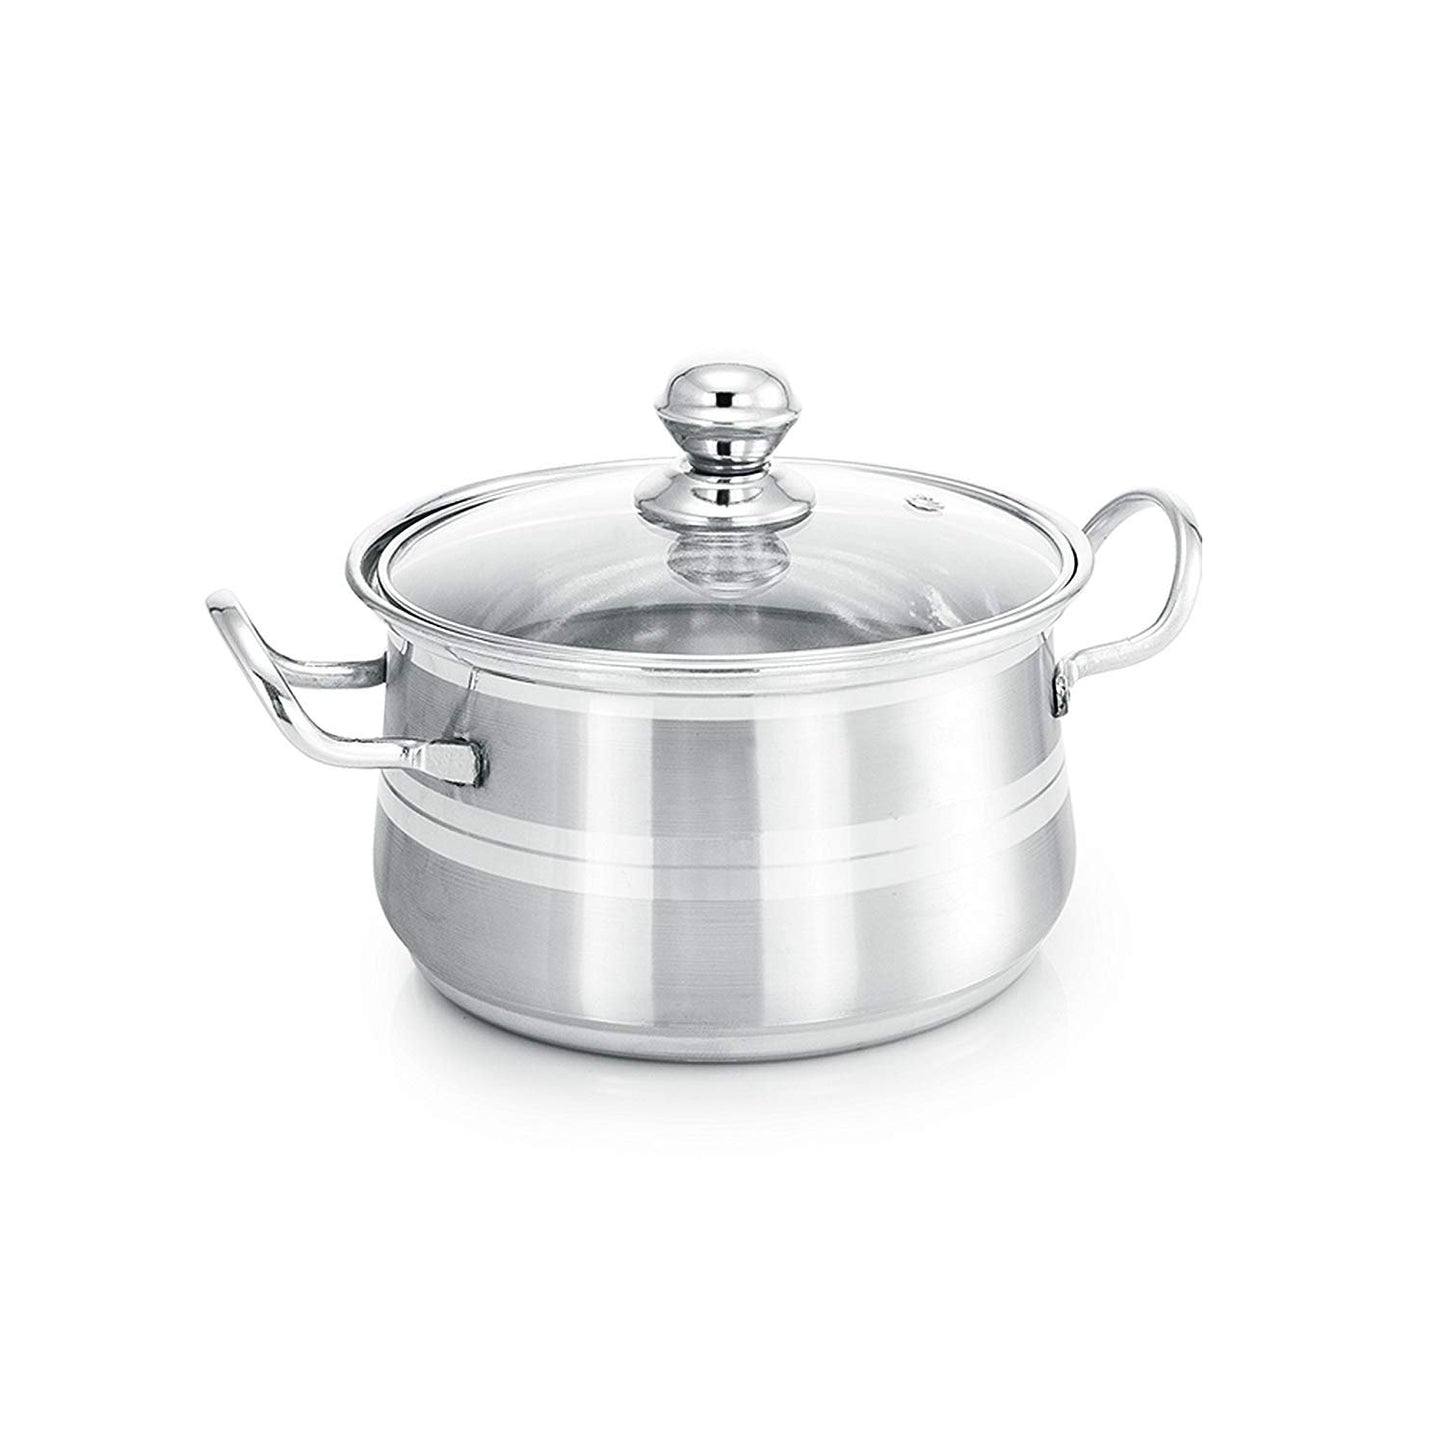 Stainless Steel Cook and Serve Dish